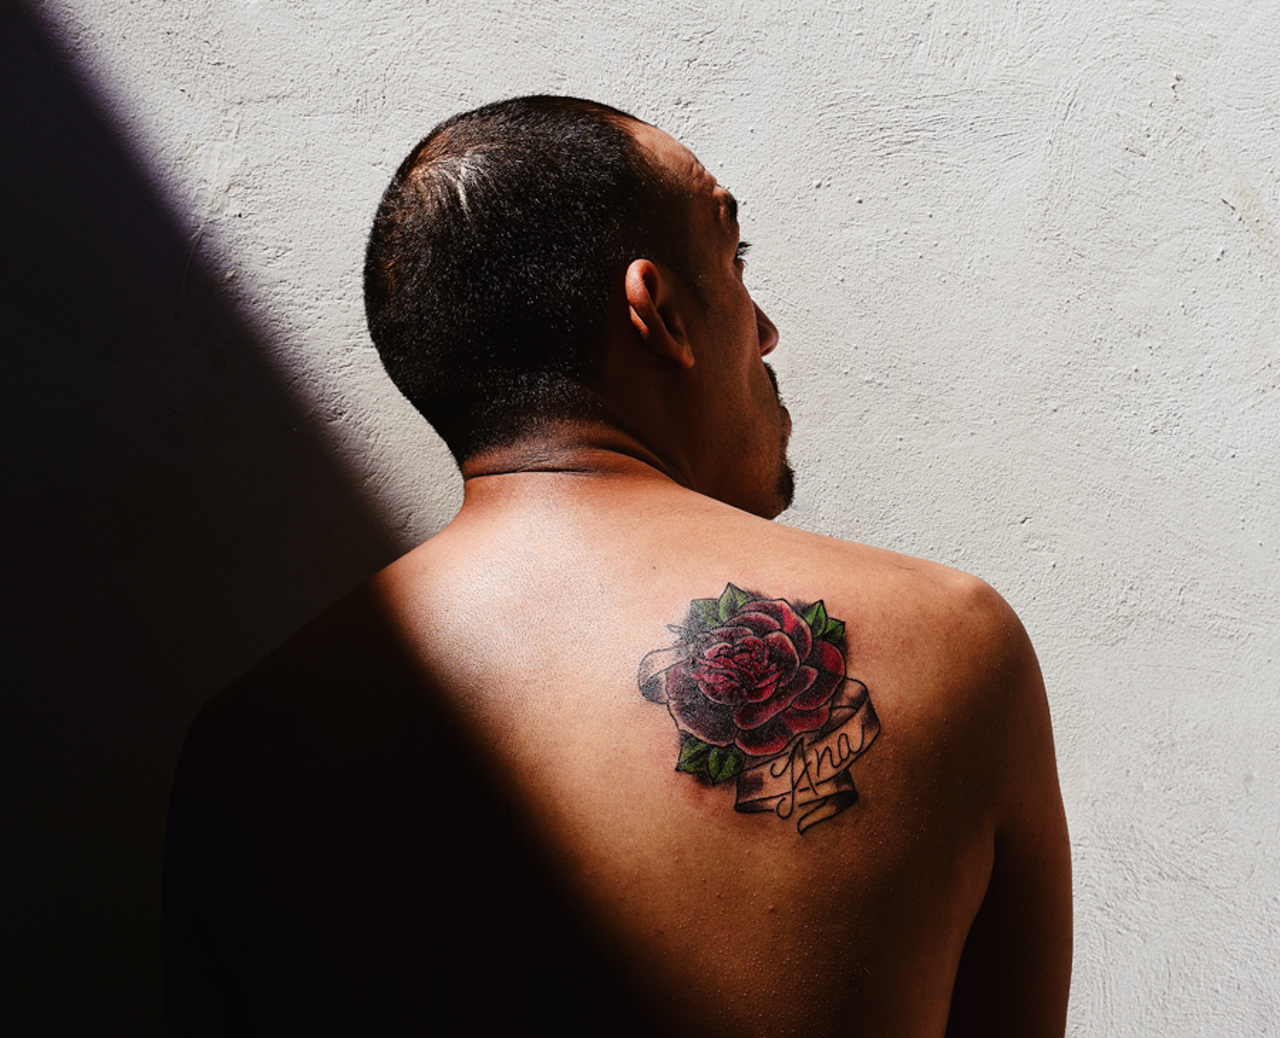 This man got a rose tattoo for his mother. “A couple guys who had been in the United States and been involved in gangs there had been deported,” Becki says. “(He) is one of them. His mother lives in New York and he can’t see her. He’s not allowed to go back even though he’s working on turning his life around.”